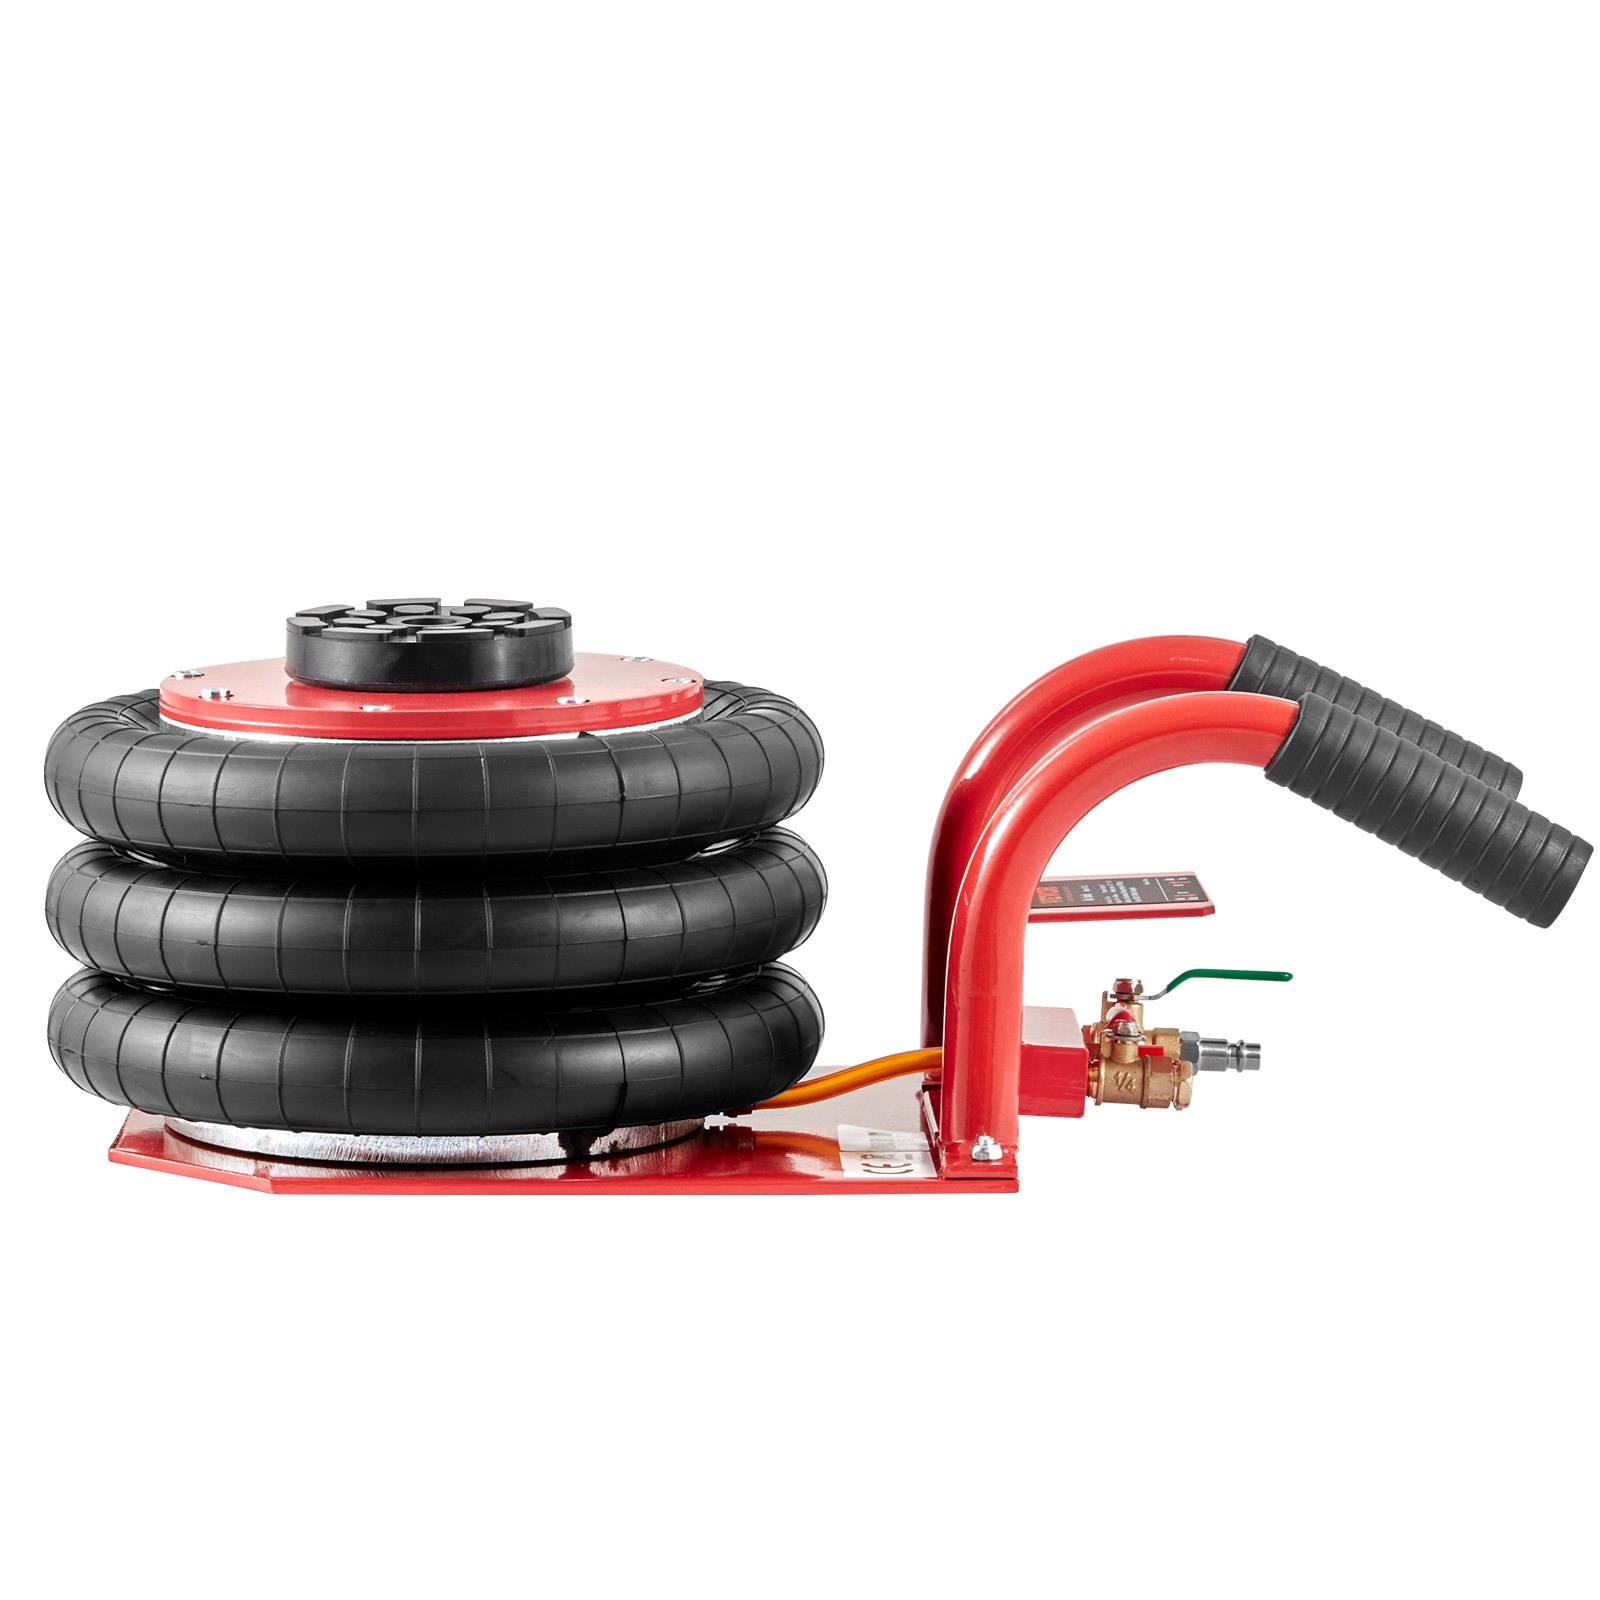 VEVOR Air Jack, 3 Ton/6600 lbs Triple Bag Air Jack, Airbag Jack with Six Steel Pipes, Lift up to 17.7 inch/450 mm, 3-5 s Fast Lifting Pneumatic Jack, with Side Handles for Car, Garage, Repair (Red), Goodies N Stuff